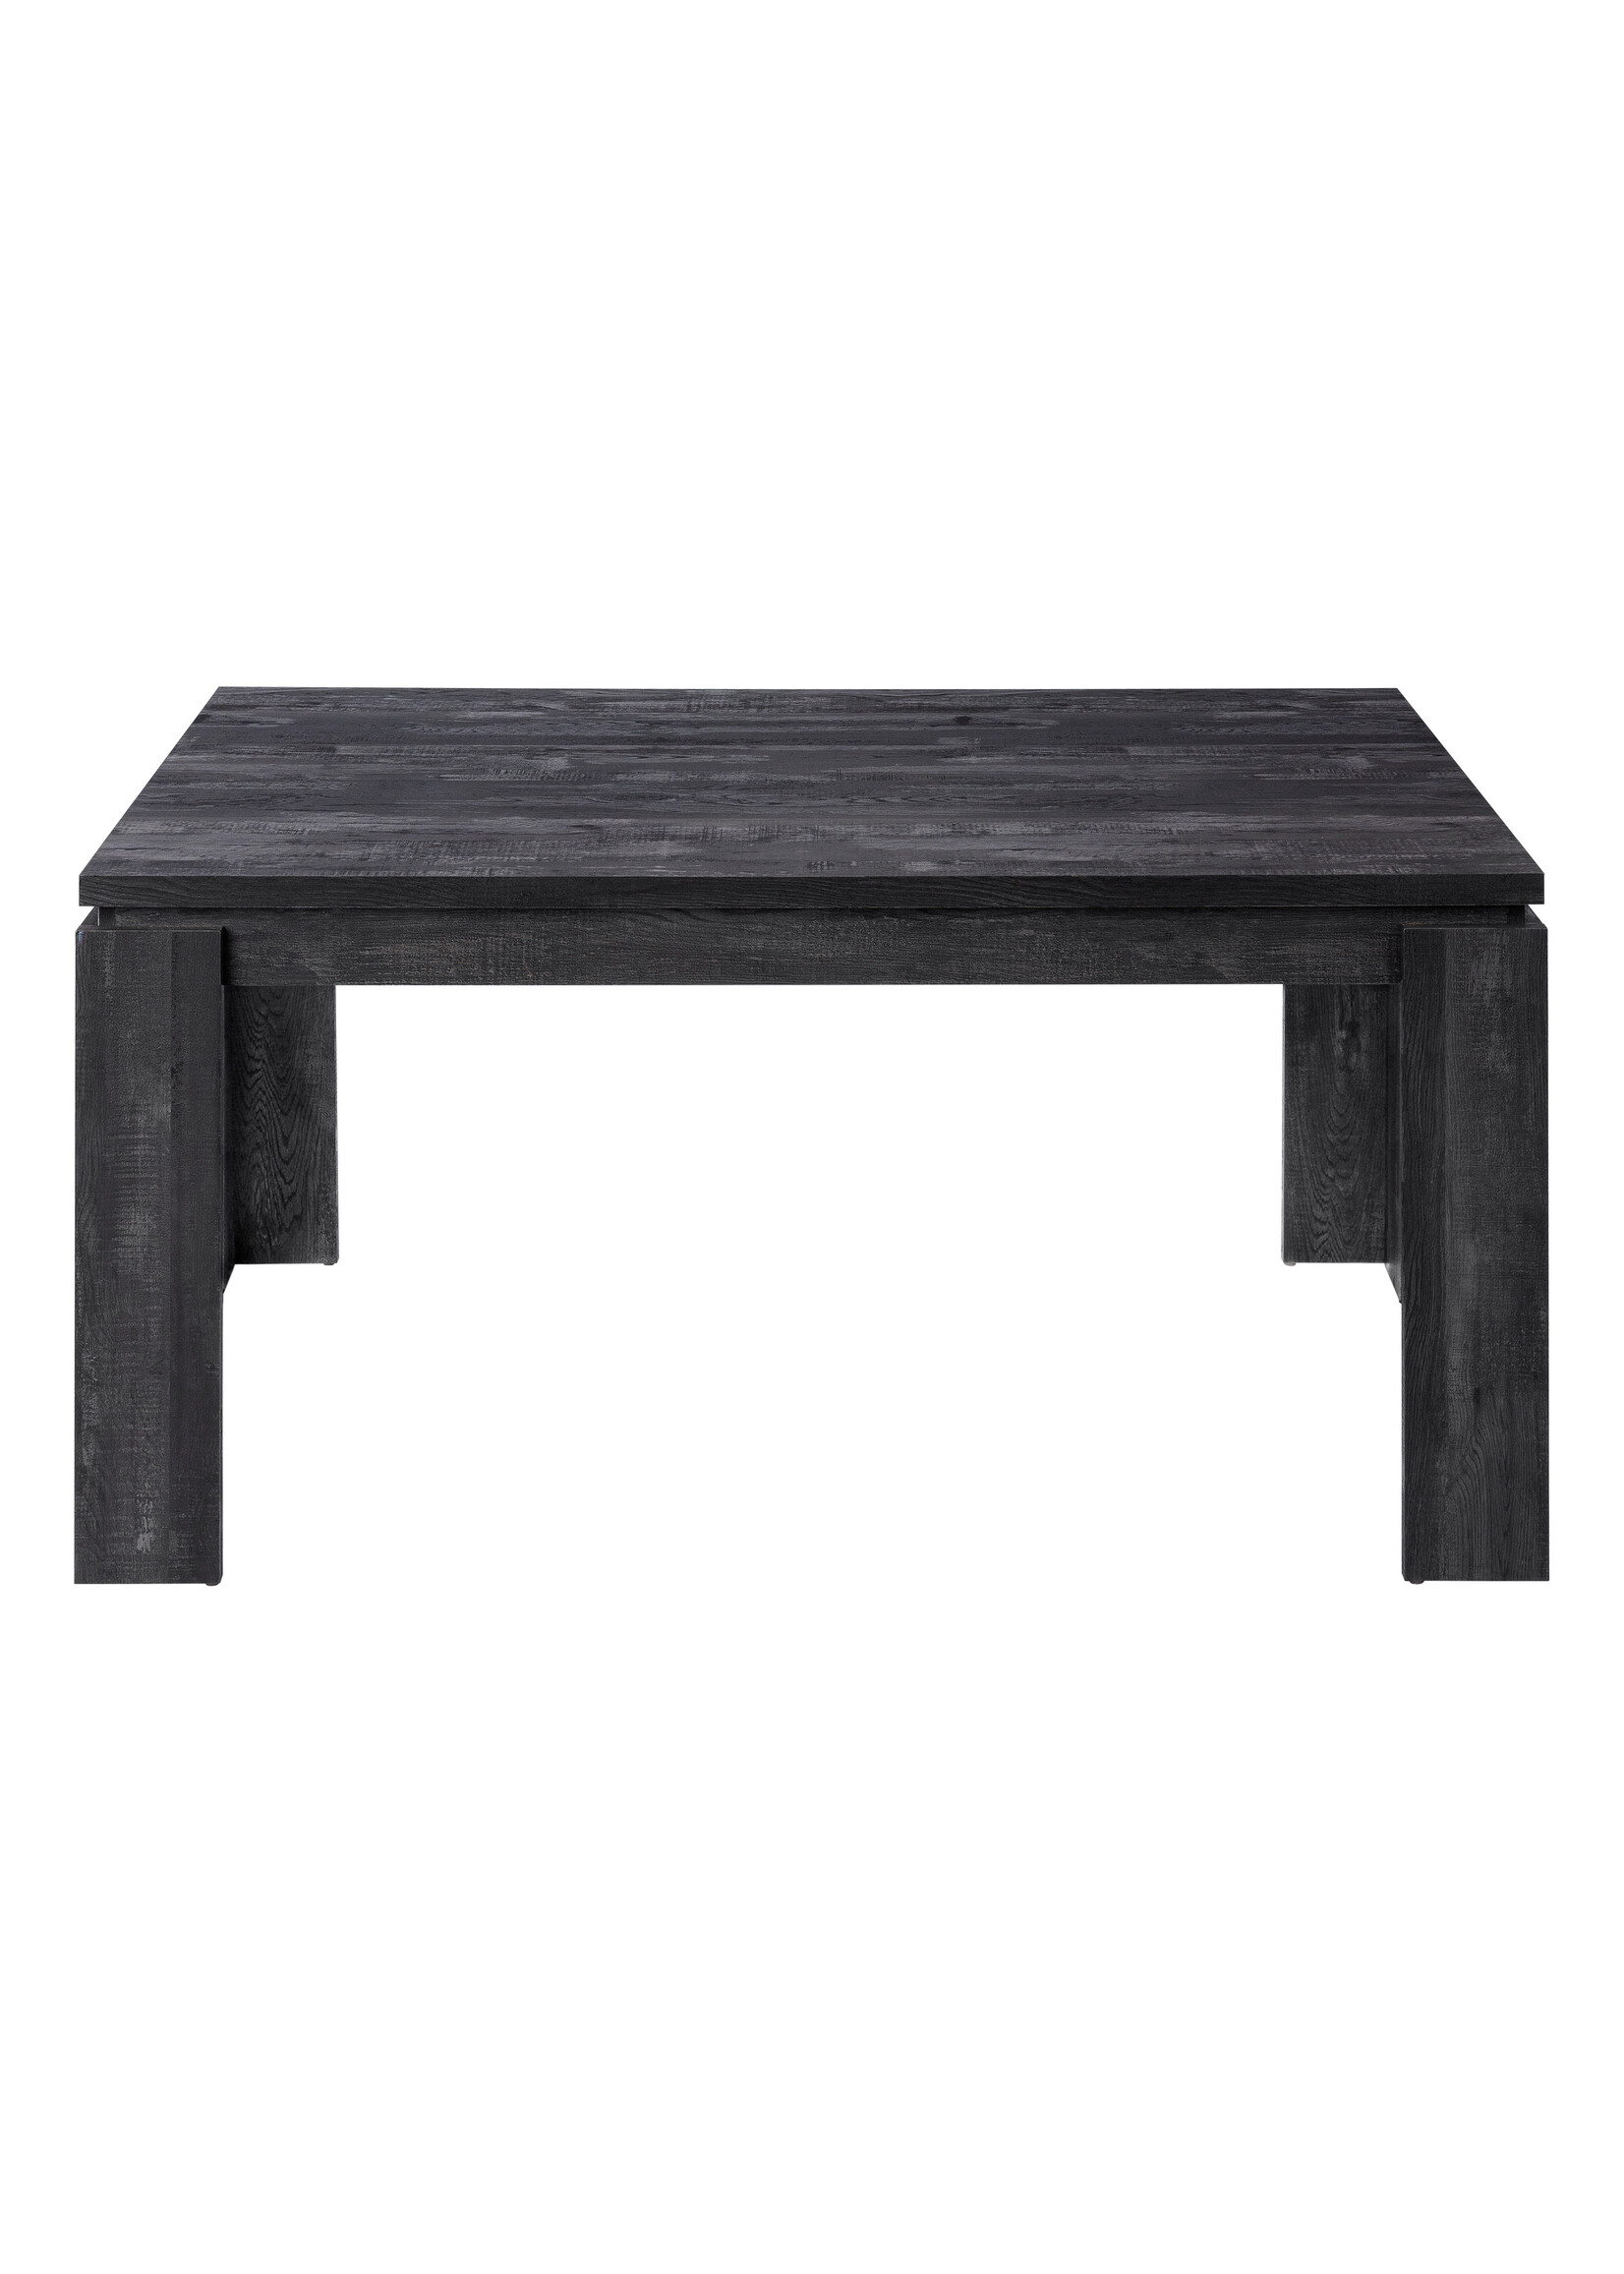 DINING TABLE - 36"X 60" / BLACK RECLAIMED WOOD-LOOK